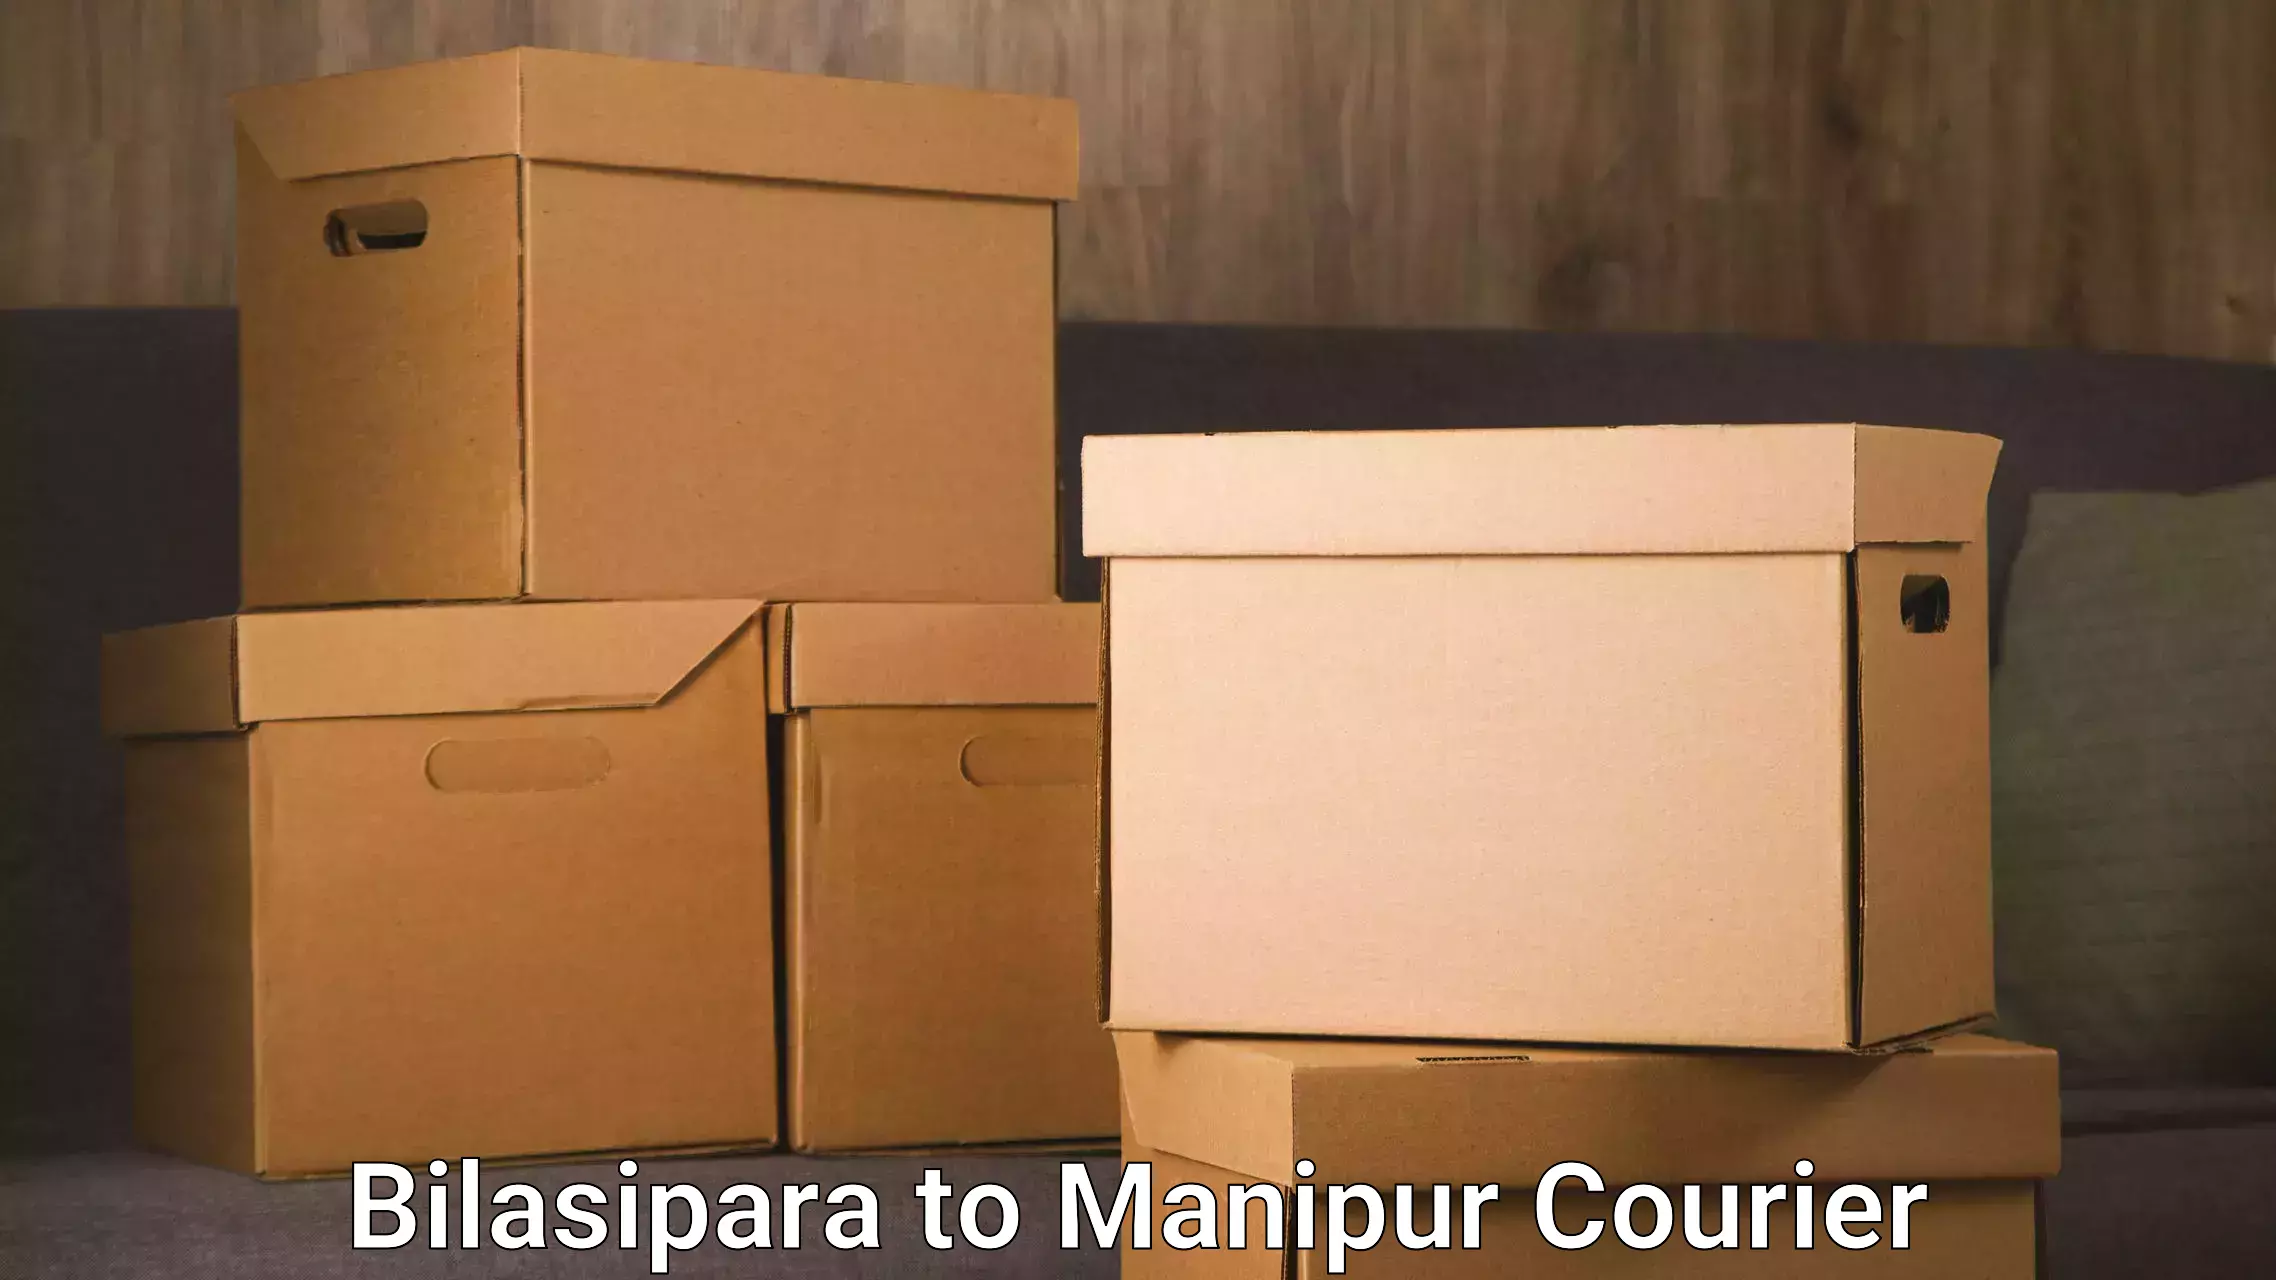 Enhanced tracking features Bilasipara to Manipur